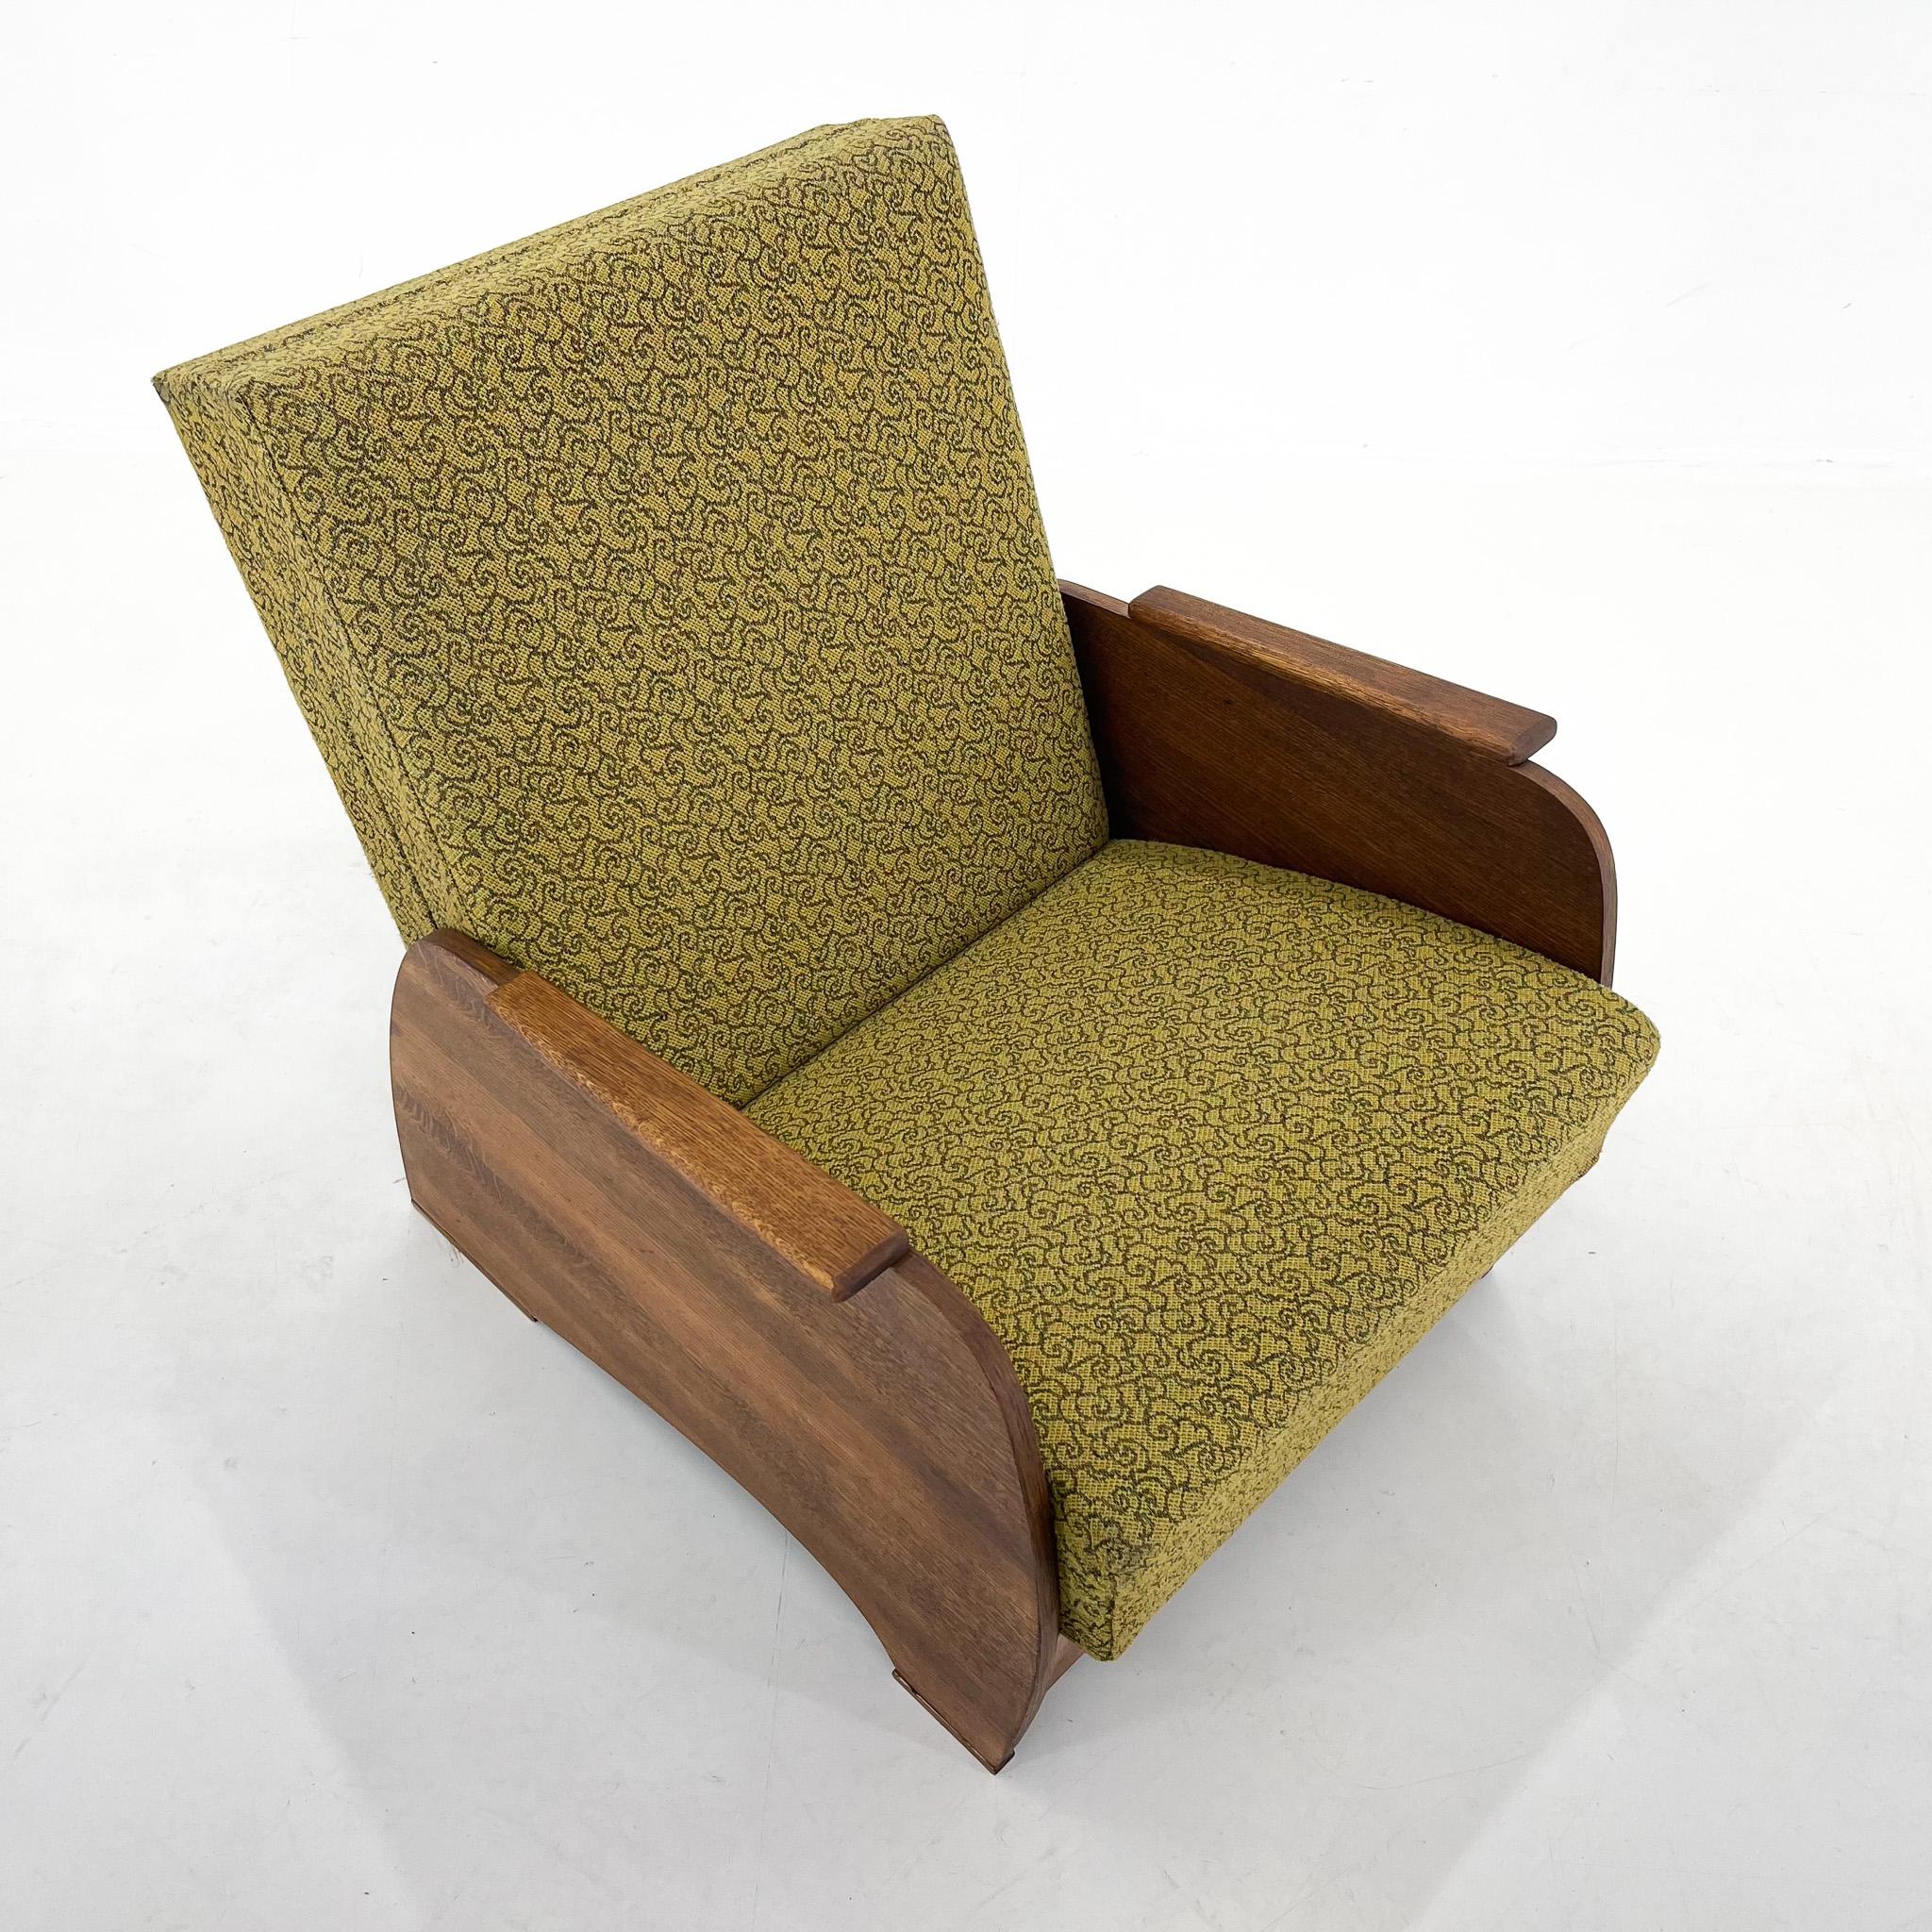 1960s Armchair Convertible to Daybed, Czechoslovakia / 2 Pieces Available For Sale 3